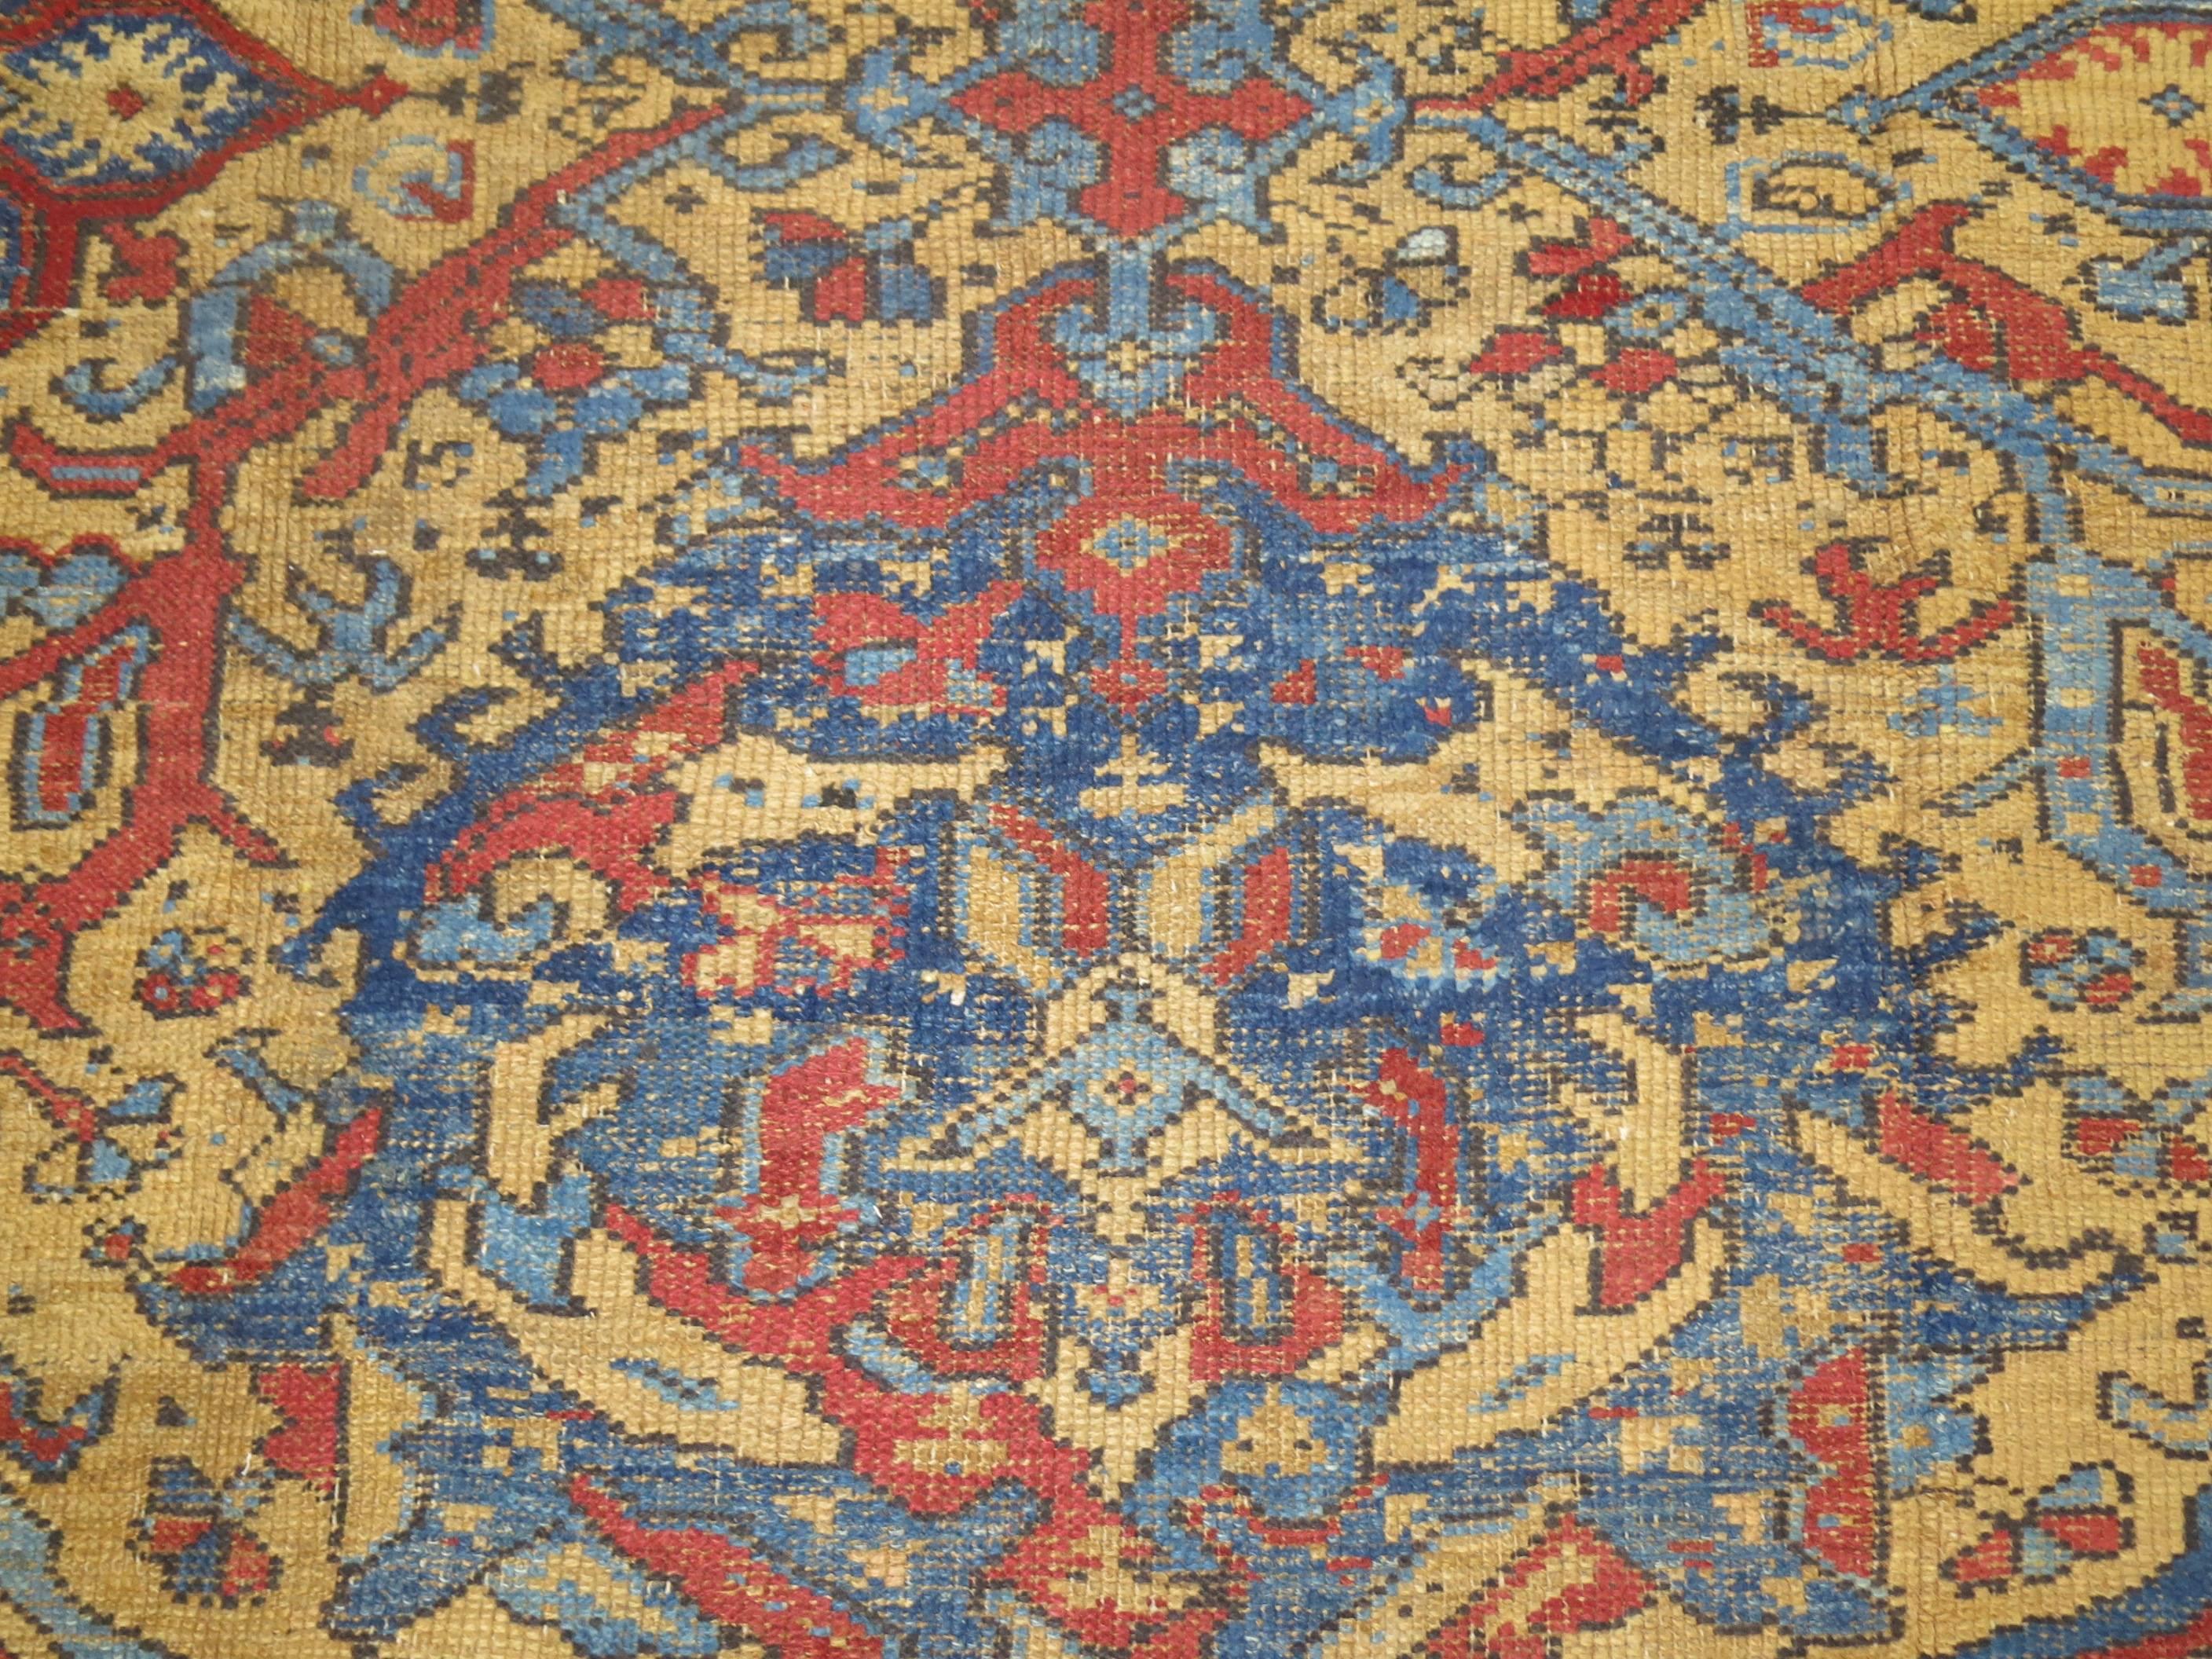 An authentic Turkish Smyrna rug with a mustard field and various shades of blues and reds.

Measures: 10'2